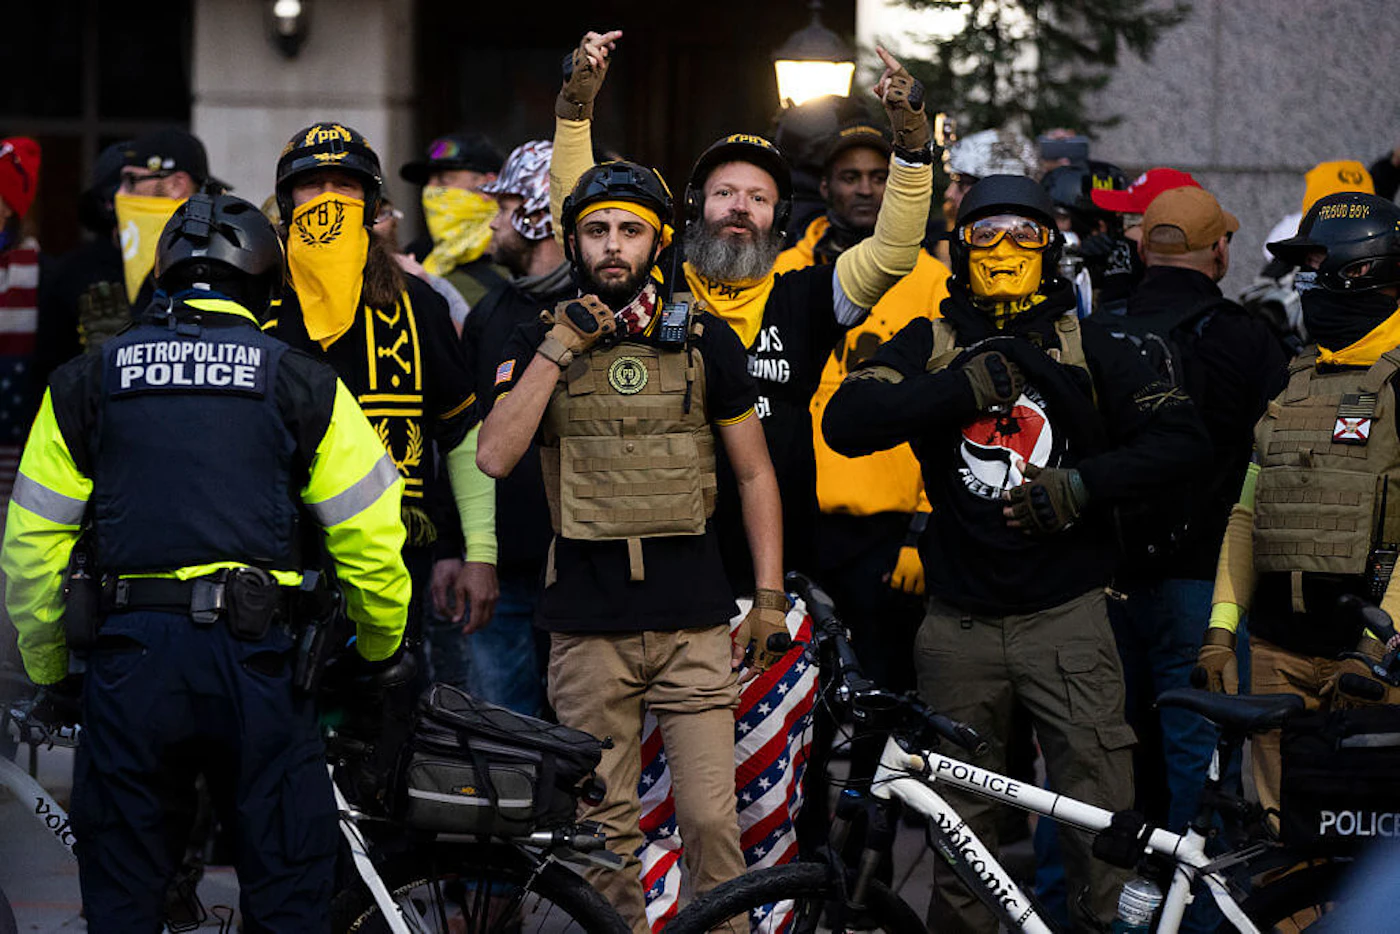 Members of the Proud Boys and Antifa stand off near Black Lives Matter Plaza on December 12, 2020 in Washington, DC. Thousands of protesters who refuse to accept that President-elect Joe Biden won the election are rallying ahead of the electoral college vote to make Trump's 306-to-232 loss official. (Photo by Tasos Katopodis/Getty Images)